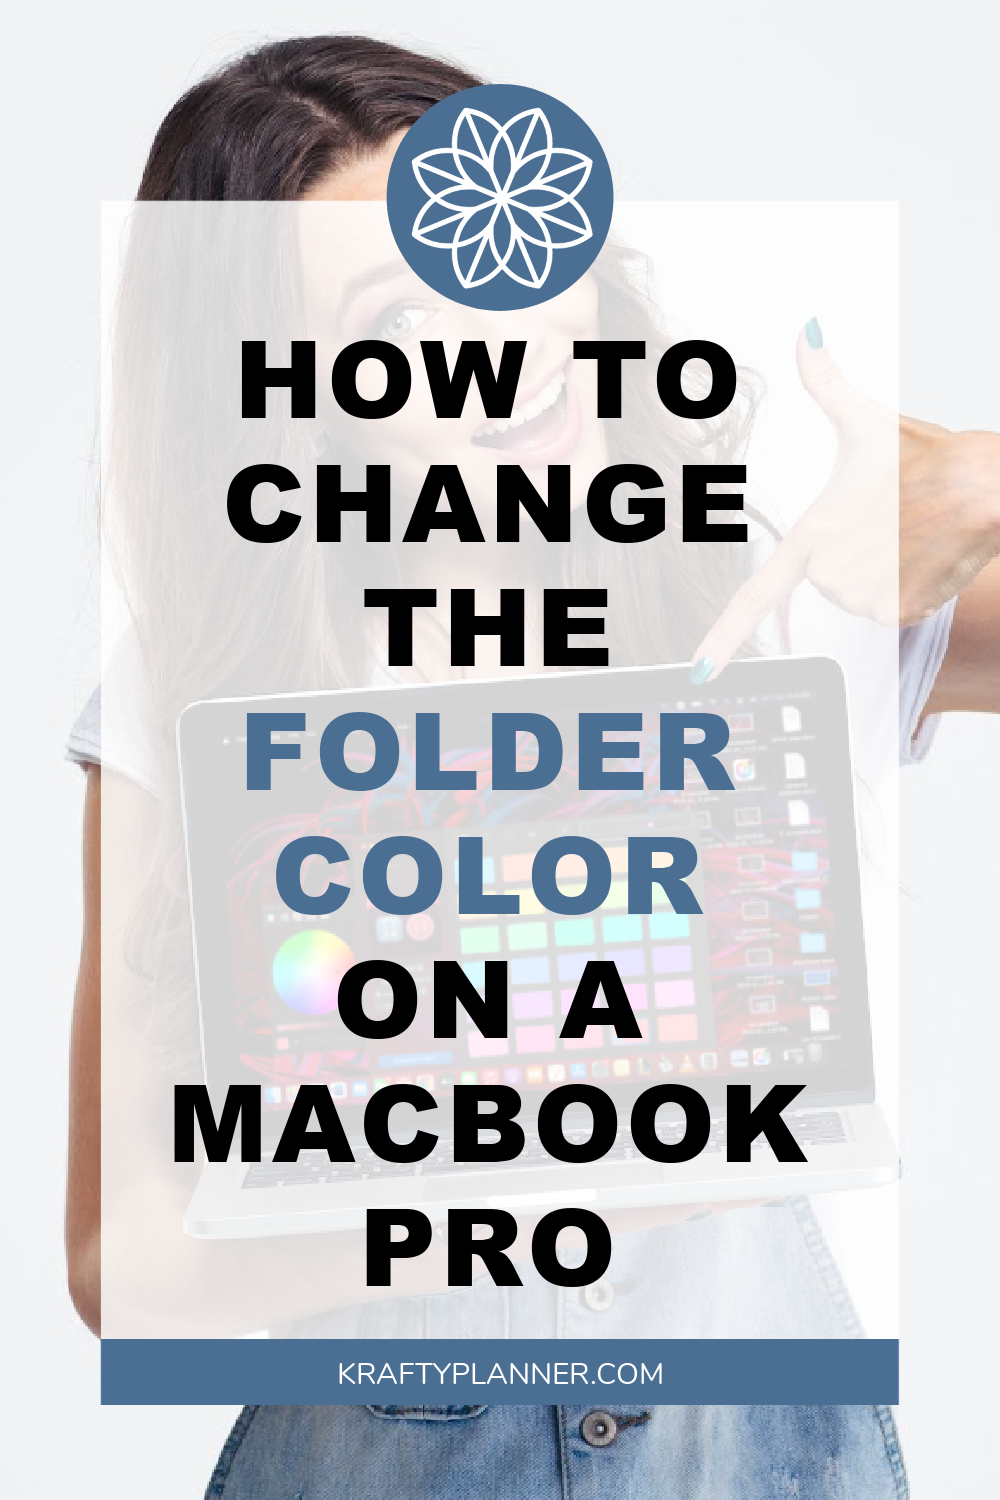 How to Change the Folder Color on Macbook Pro